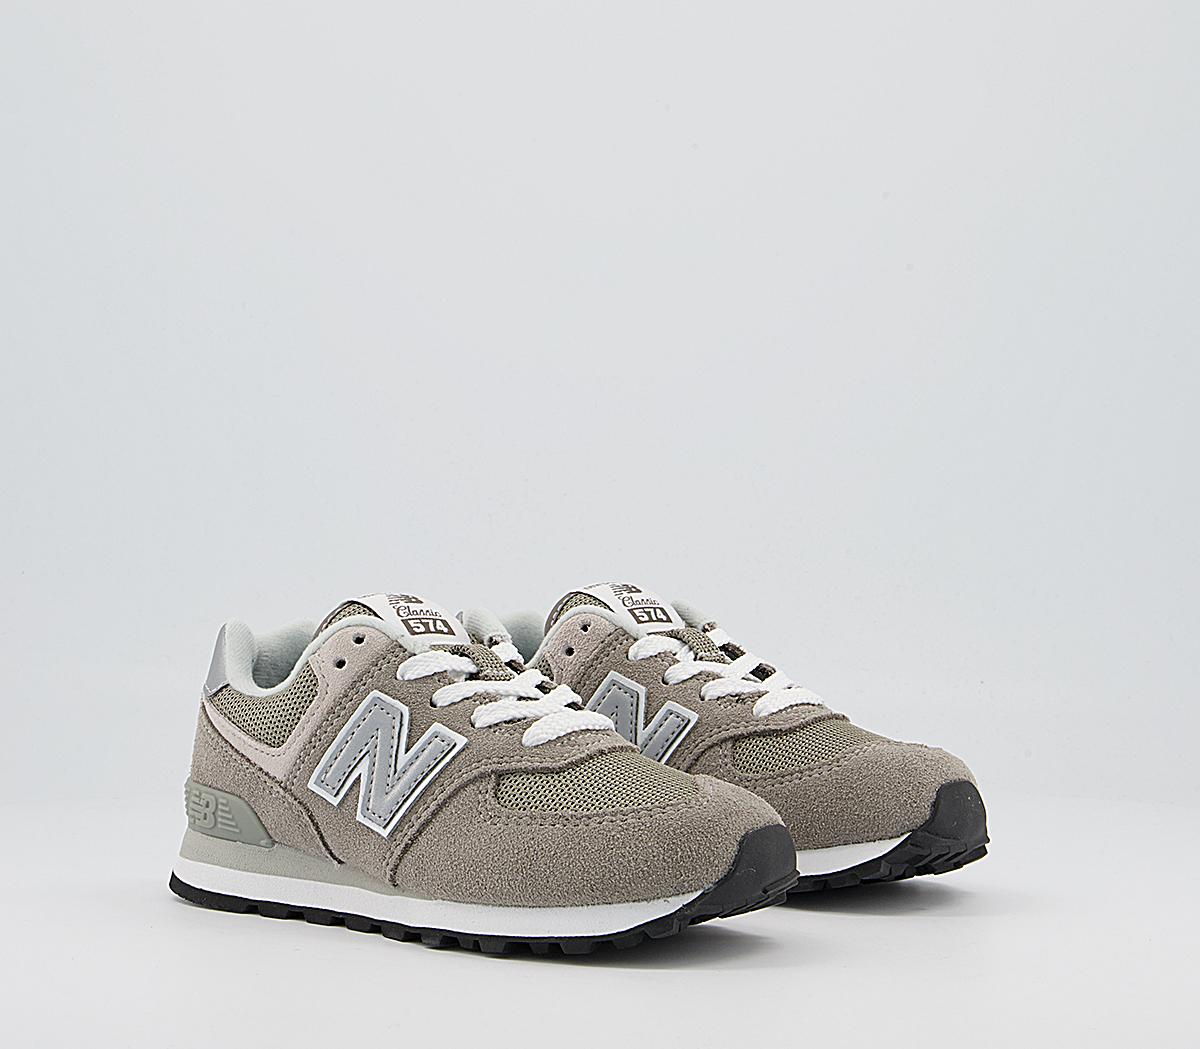 New Balance 574 Kids Trainers Grey White Rubber, 2